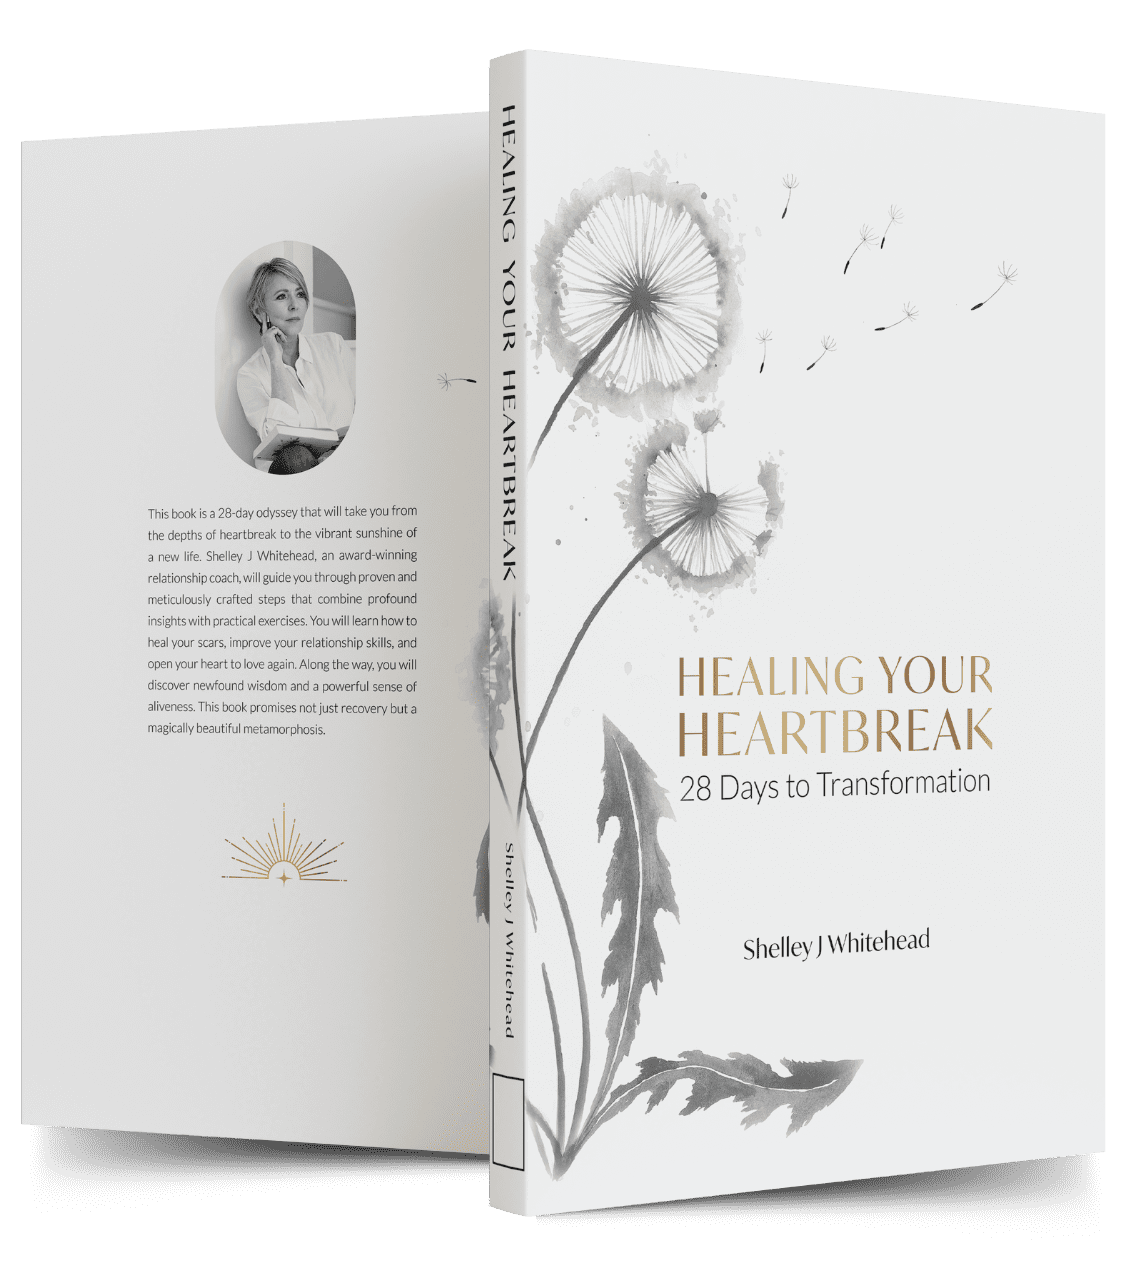 Cover of Healing Your Heartbreak Book by Shelley J Whitehead